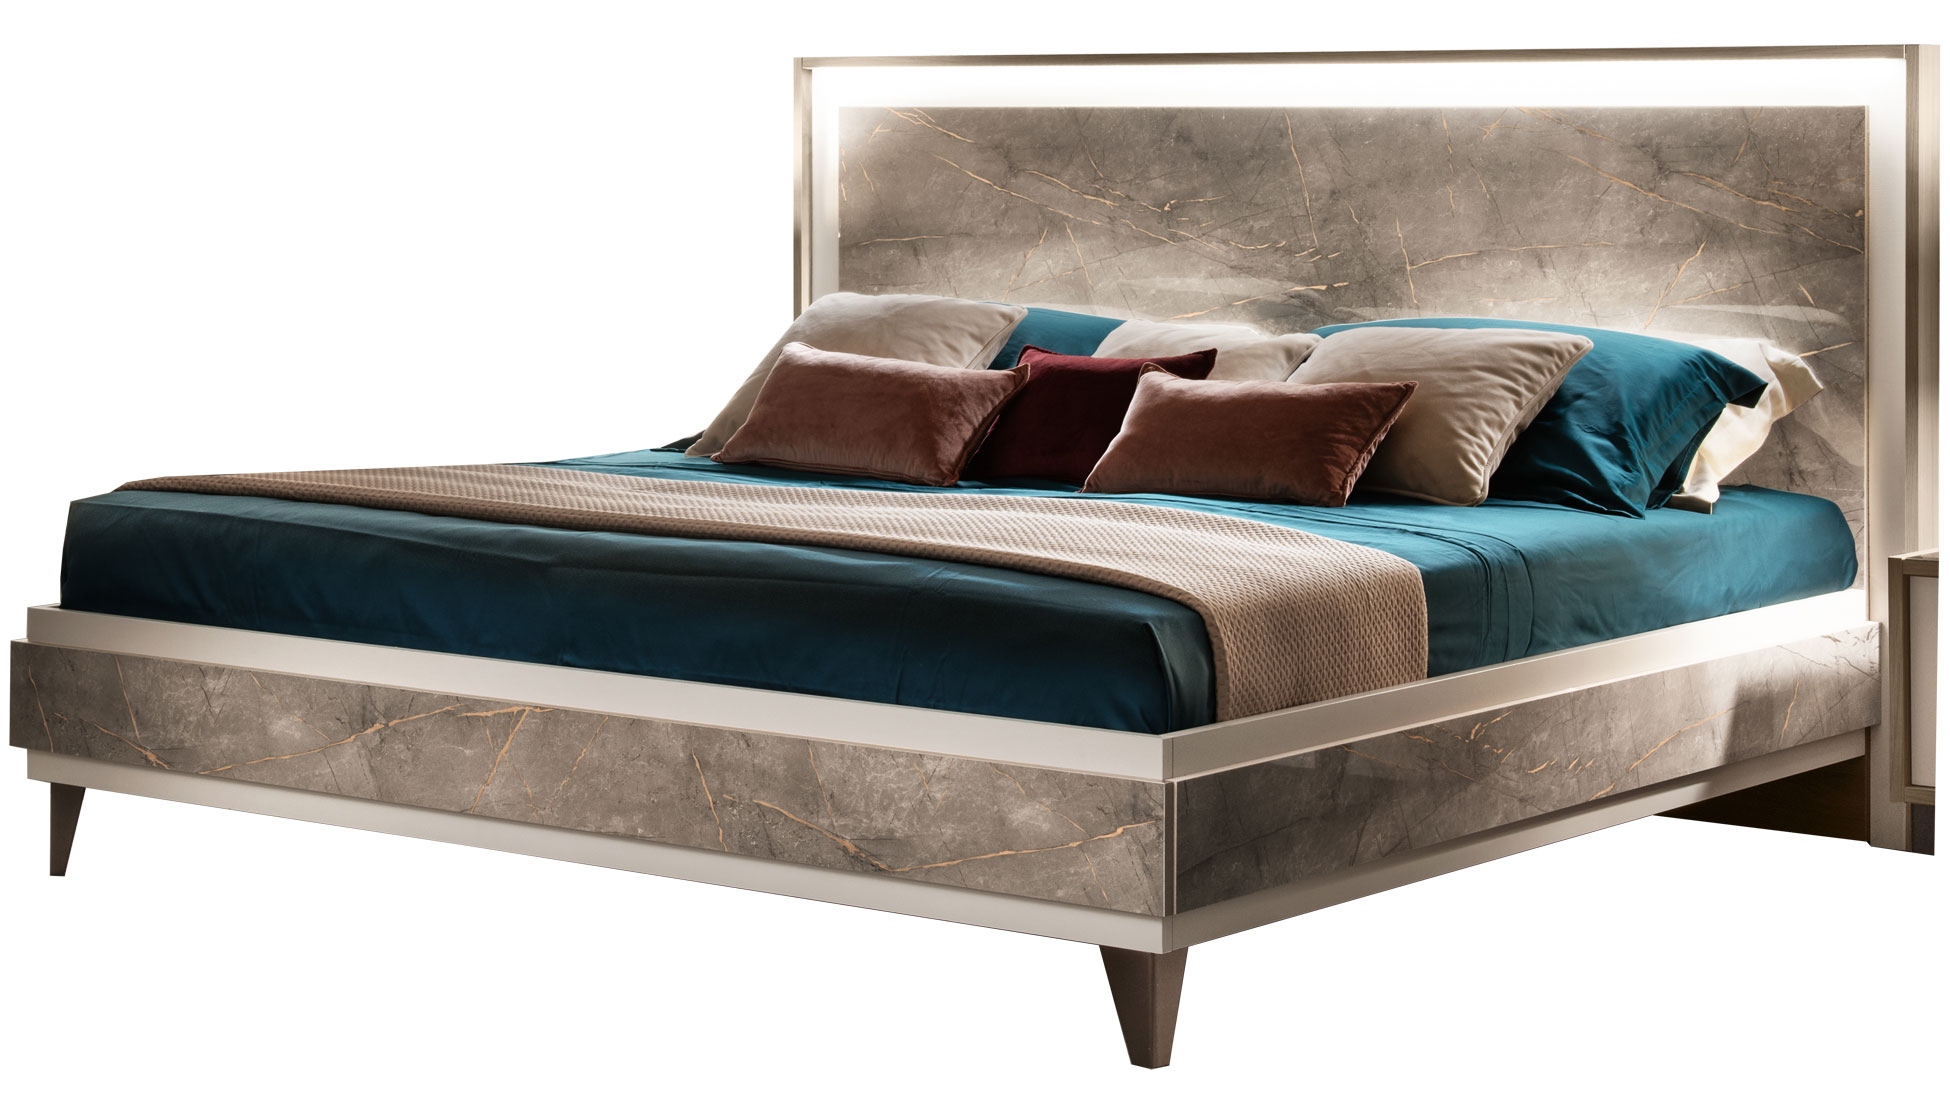 Brands Arredoclassic Living Room, Italy ArredoAmbra Bed by Arredoclassic